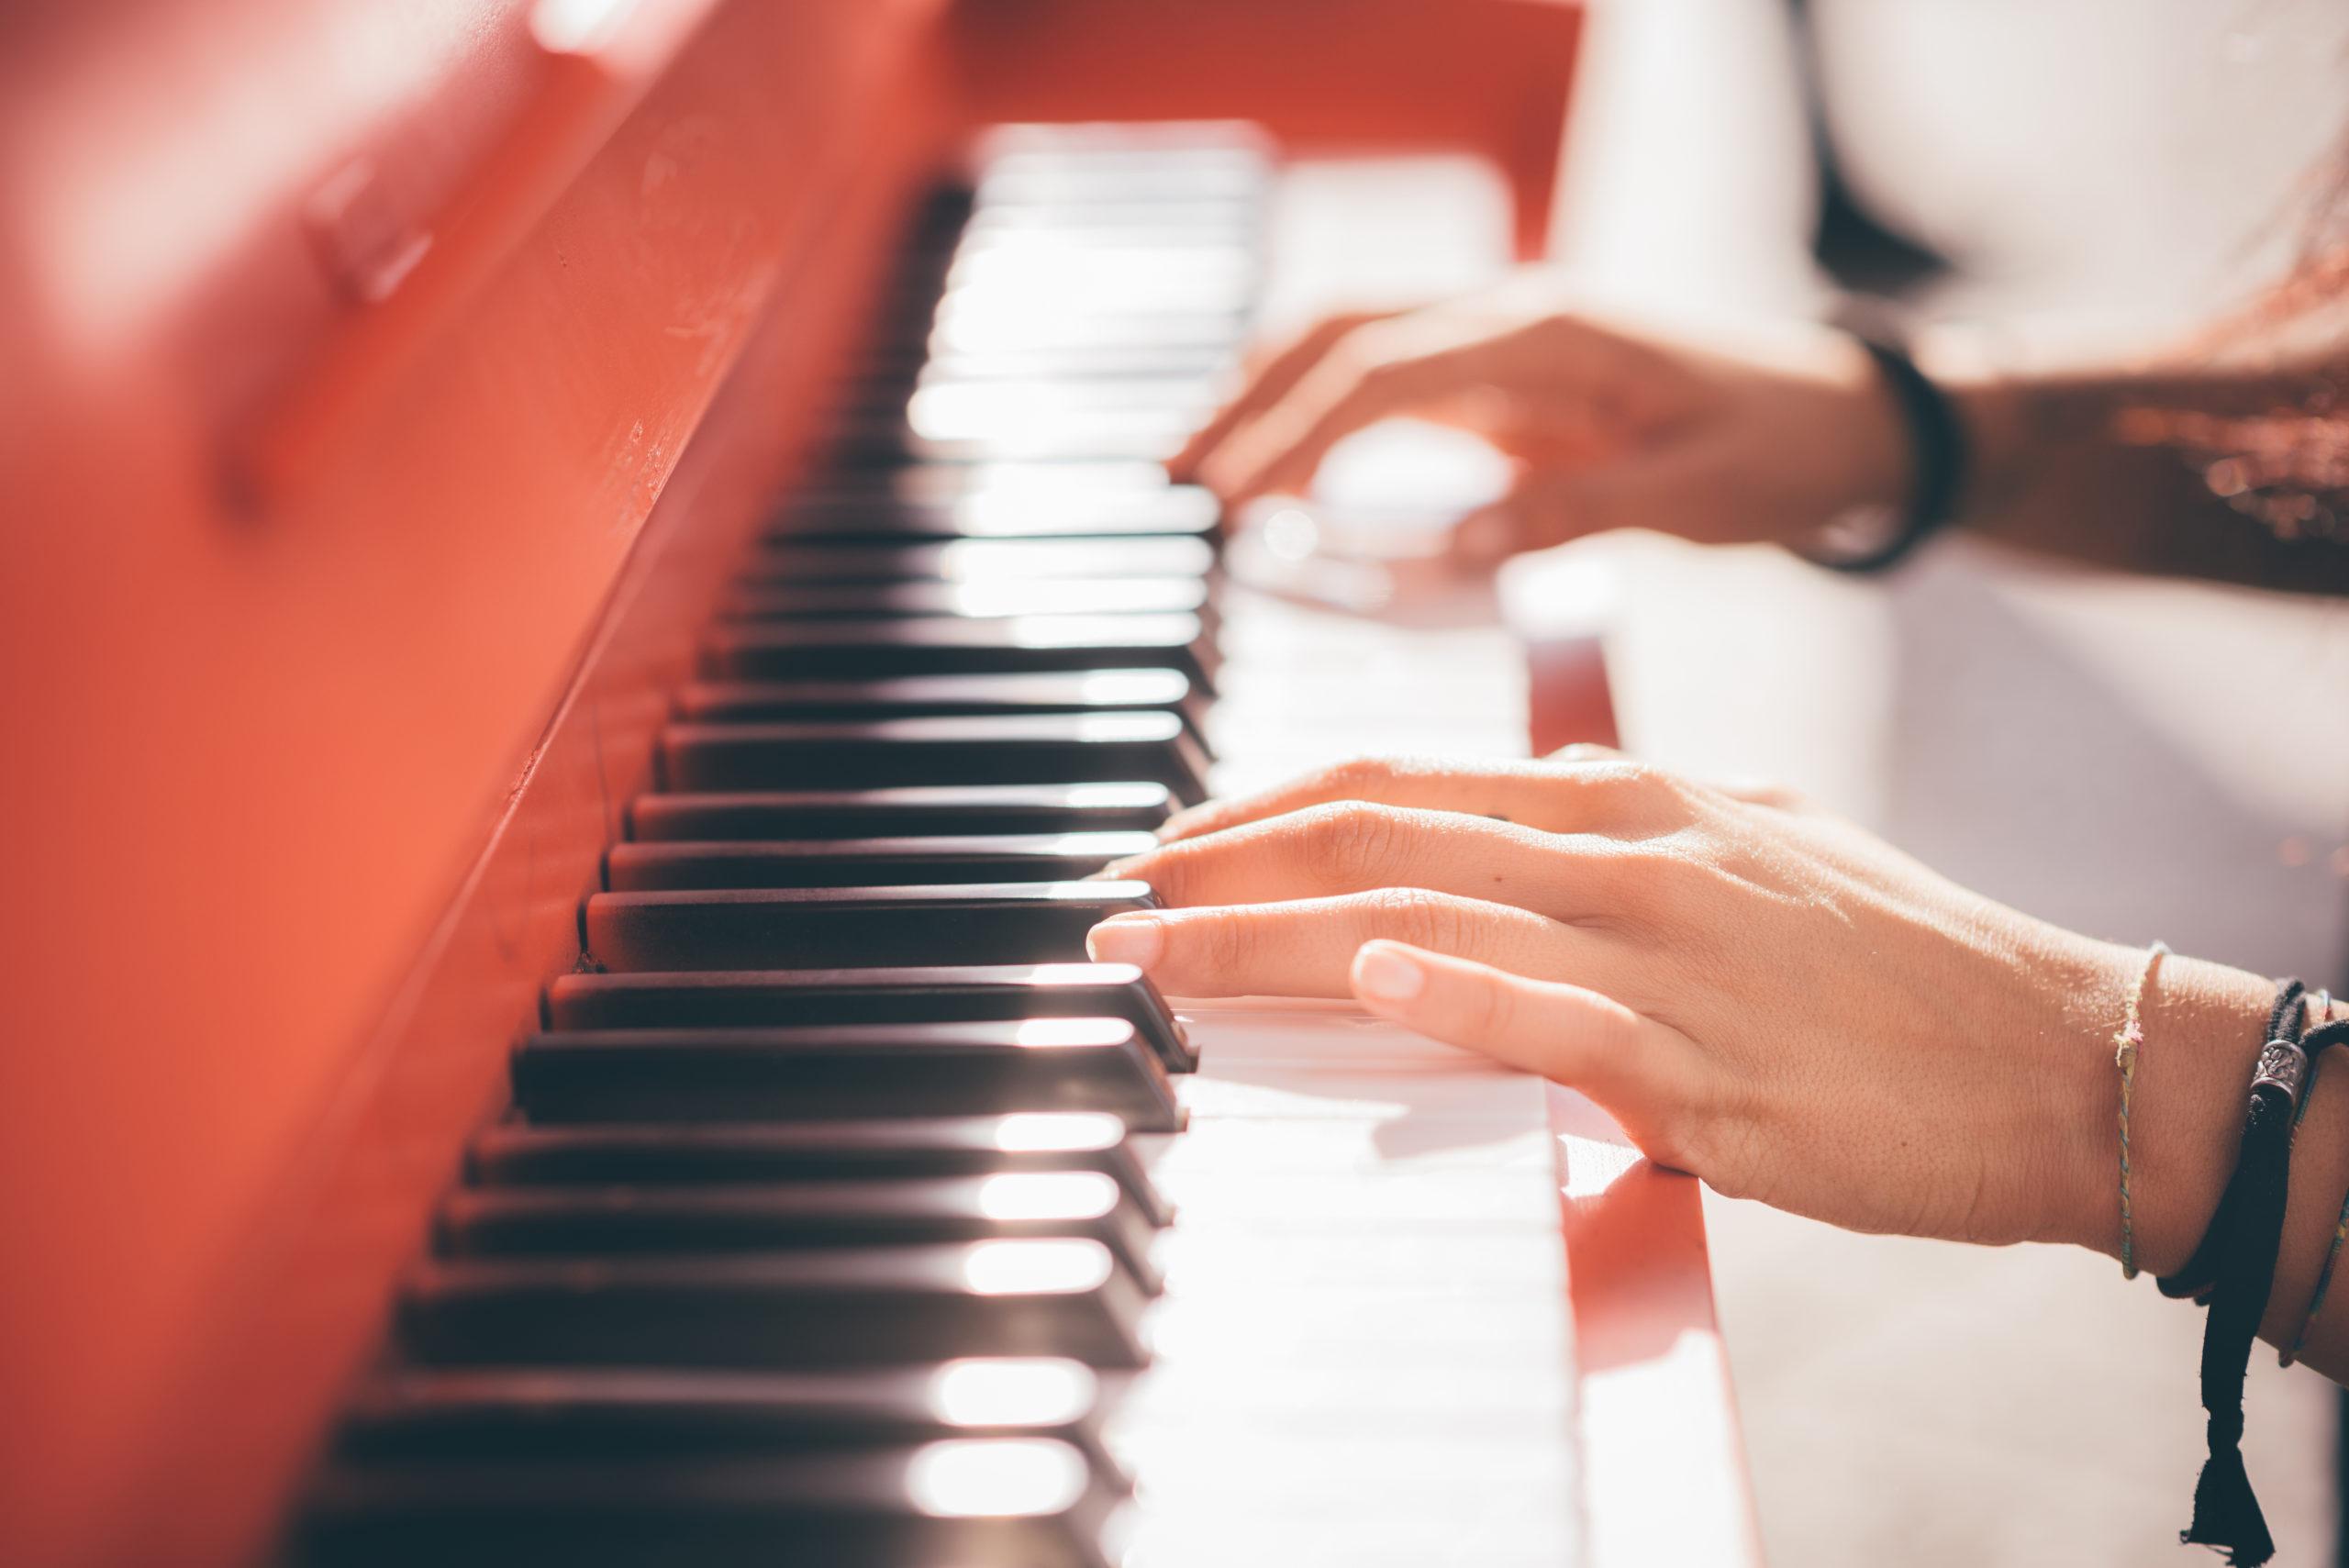  Embark On Your Musical Journey Today - Beginner Piano Lessons For All Ages